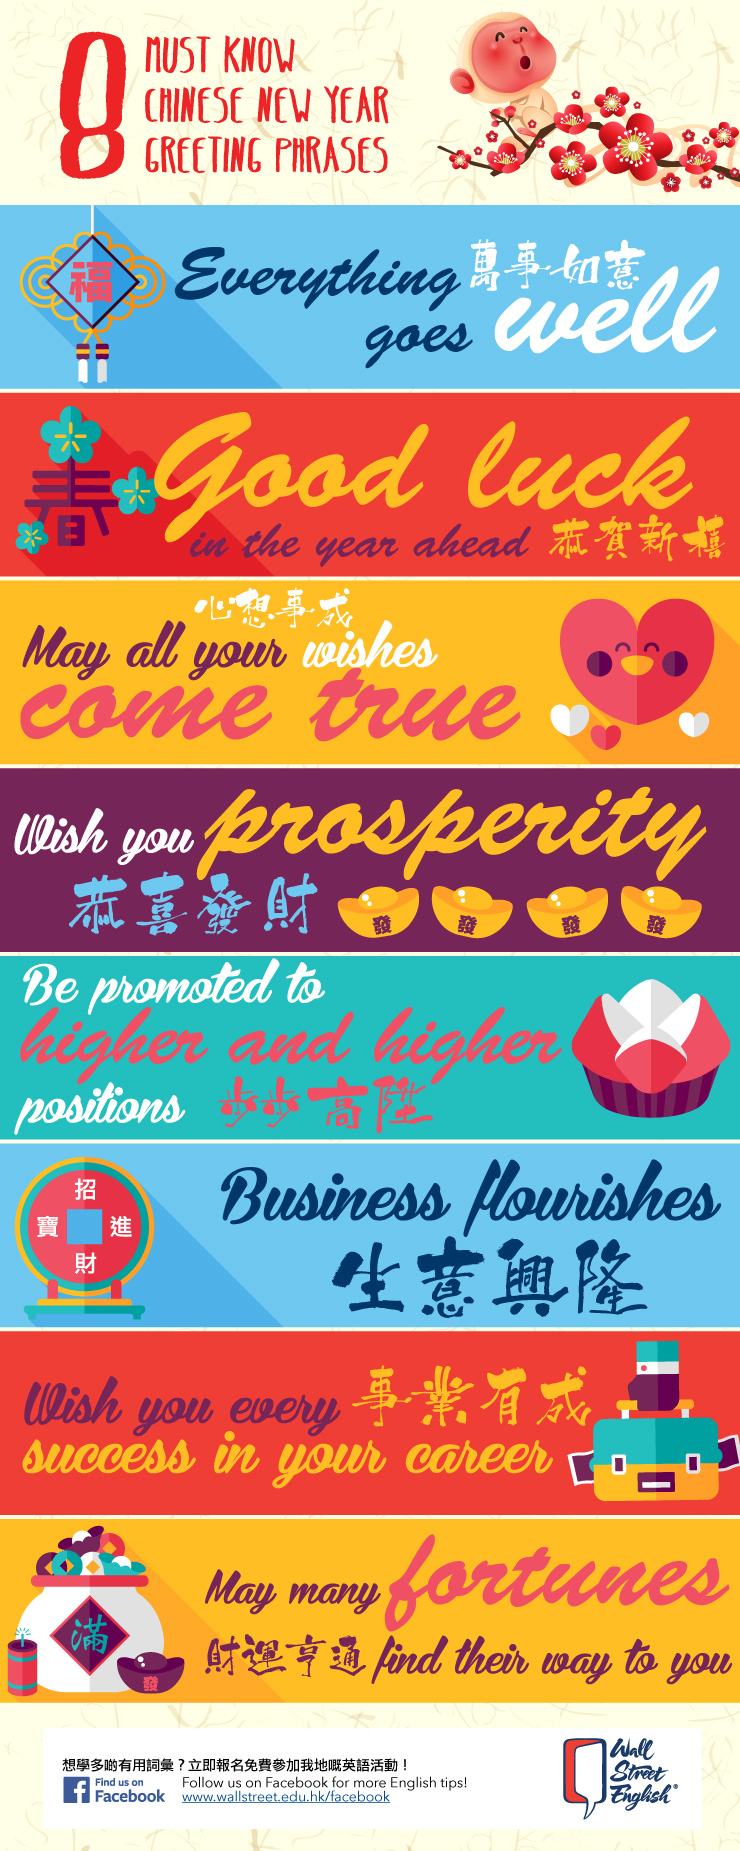 8 Must Know Chinese New Year Greeting Phrases